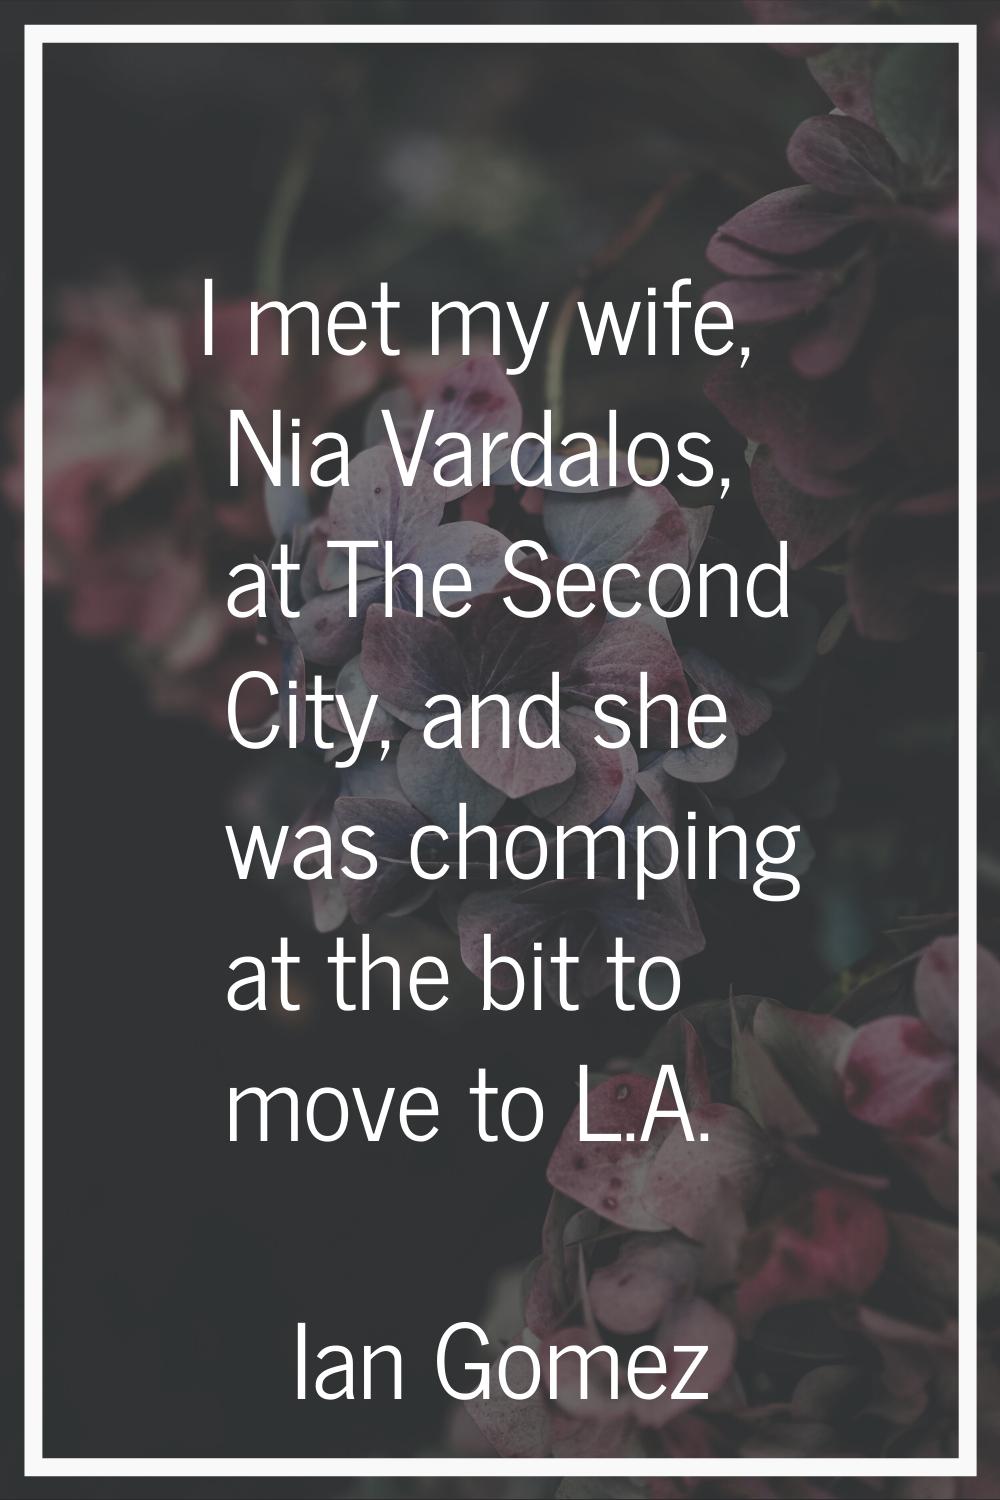 I met my wife, Nia Vardalos, at The Second City, and she was chomping at the bit to move to L.A.